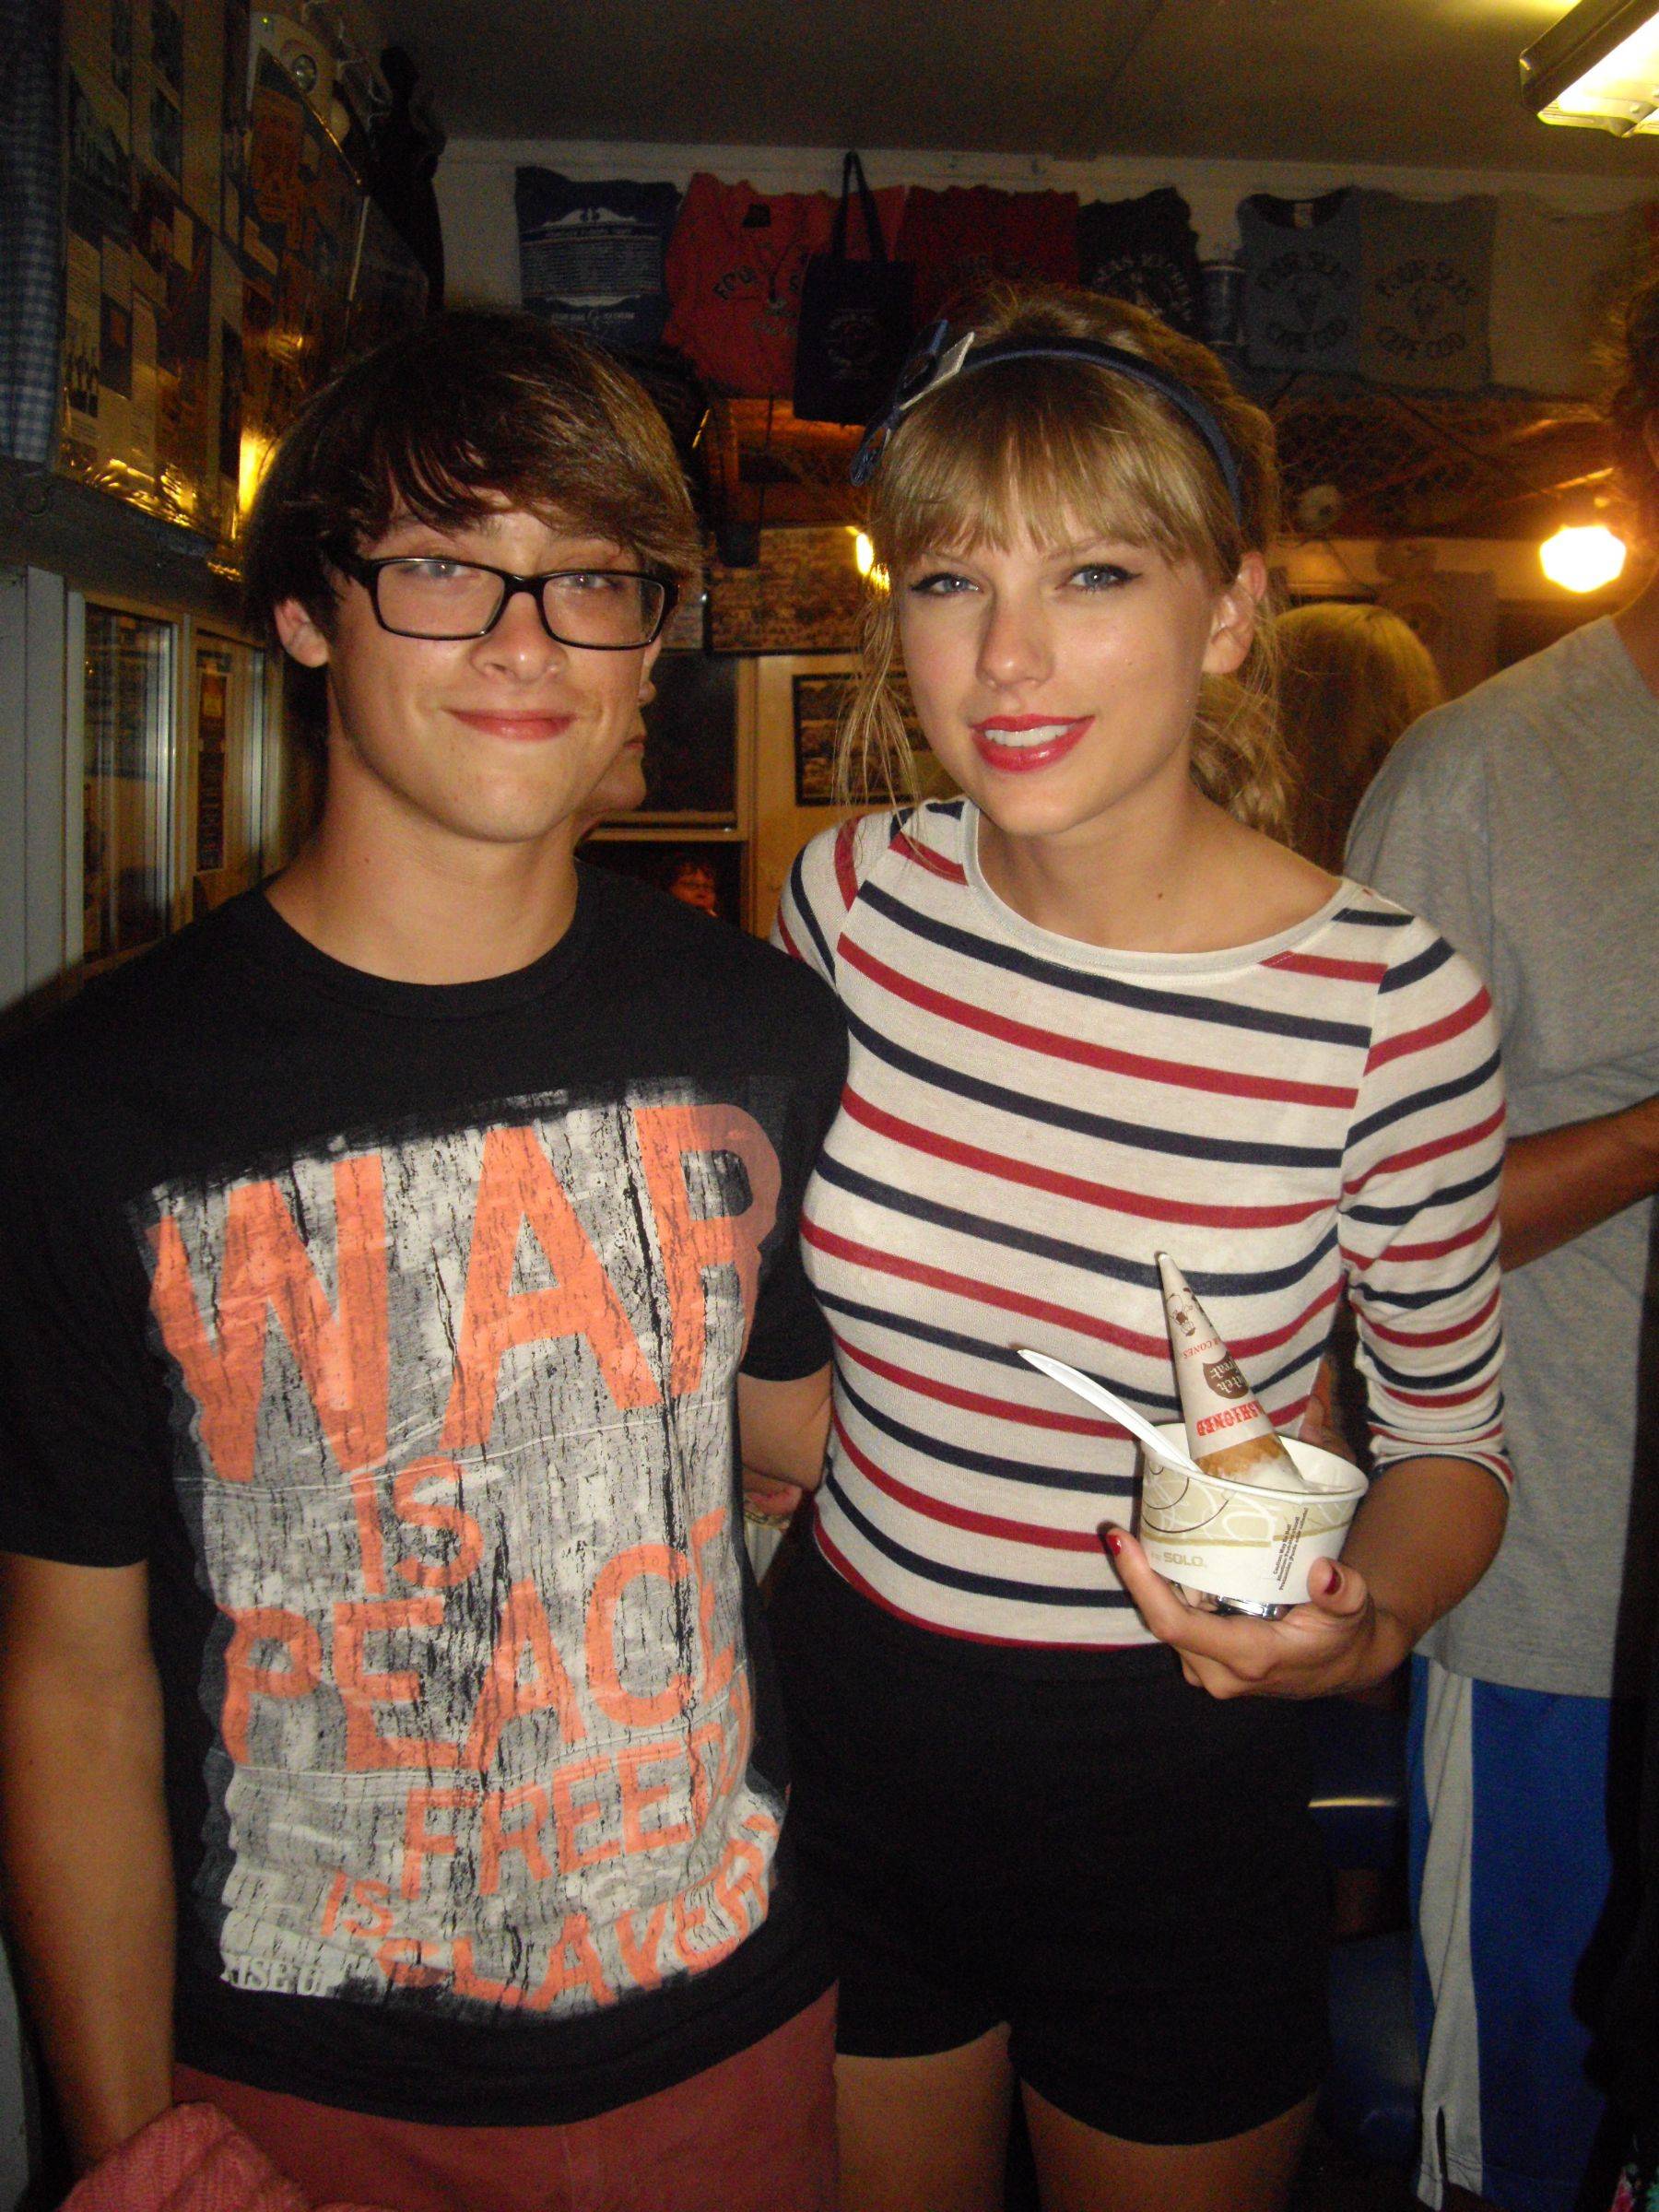 Found this picture of Taylor Swift on Reddit. A fan posted it and she has on a see through white shirt.